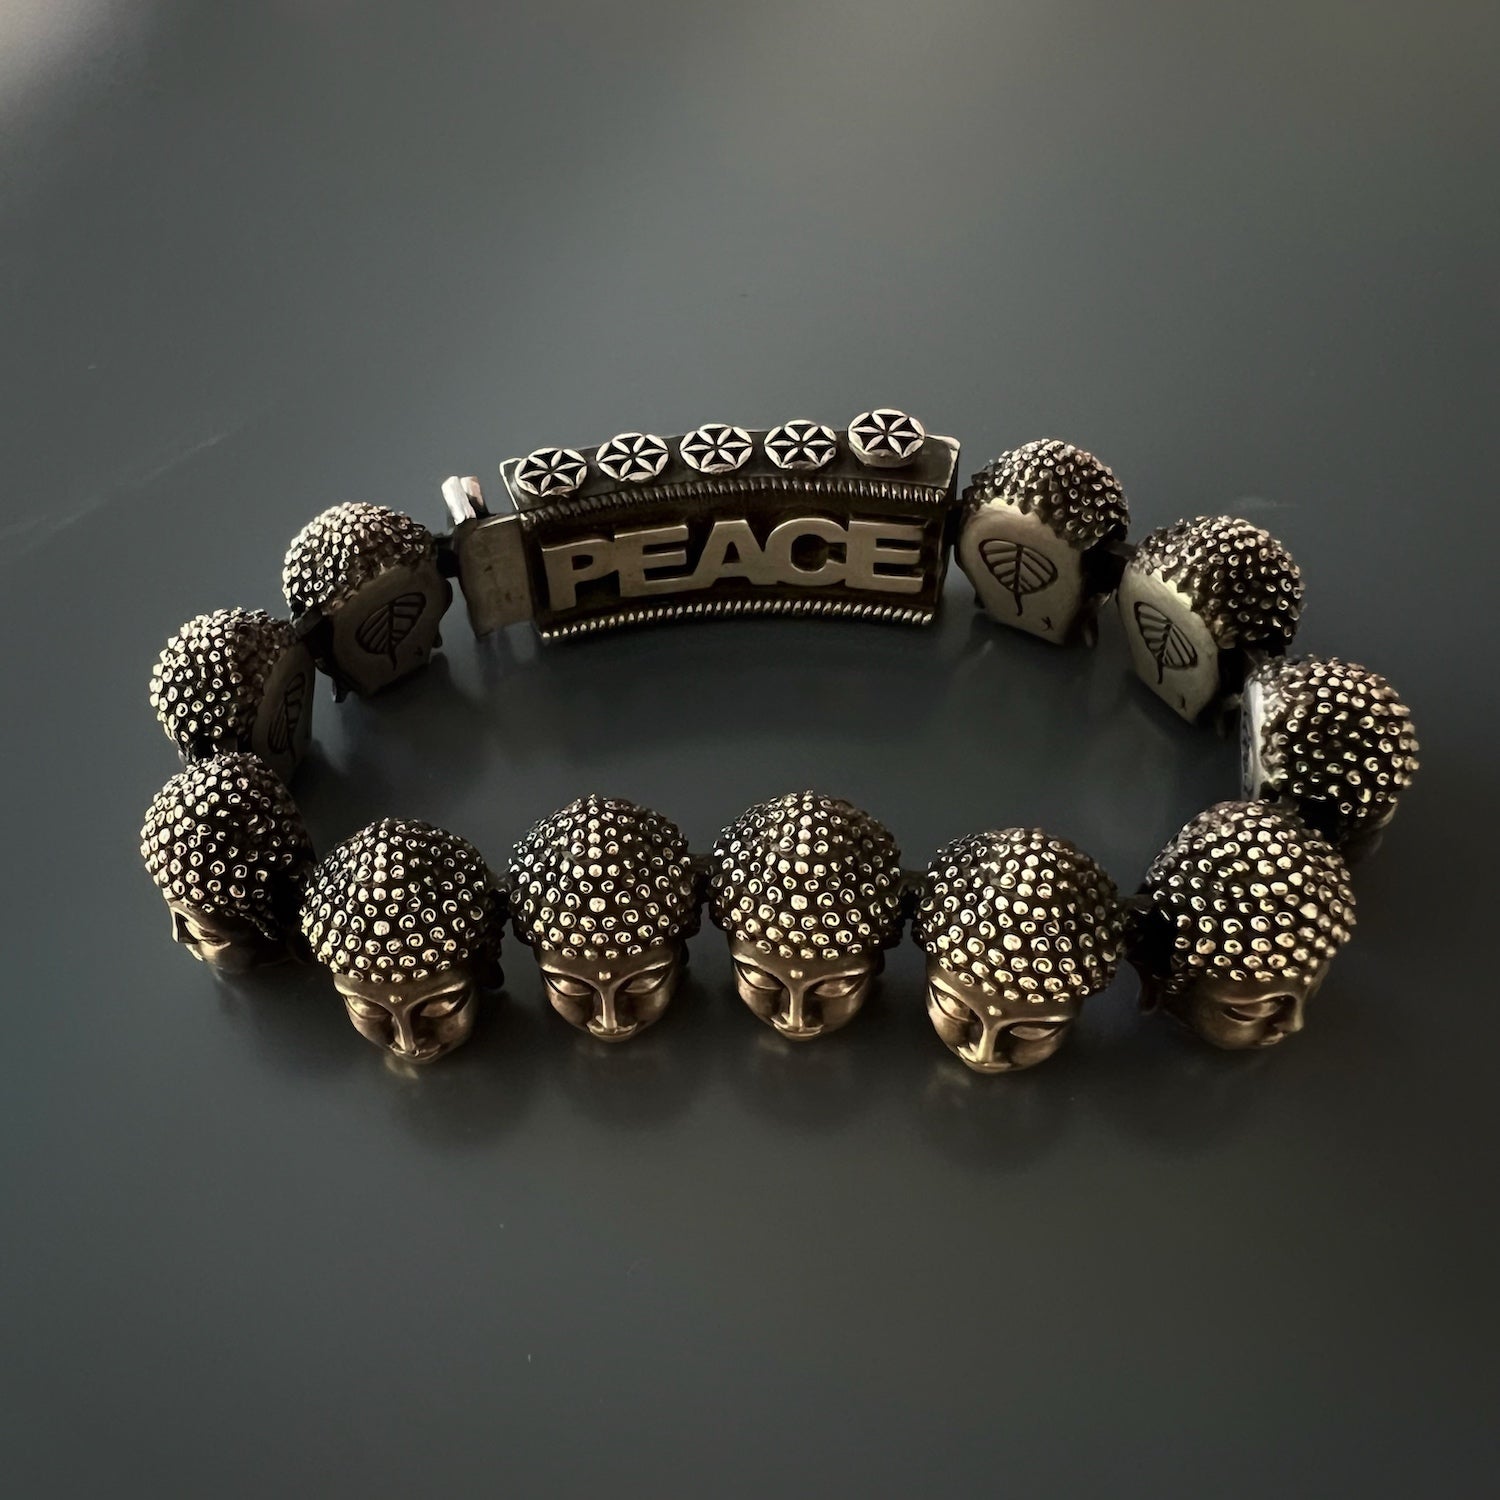 Handcrafted in the USA - Buddha Peace Bracelet, crafted with care and precision.